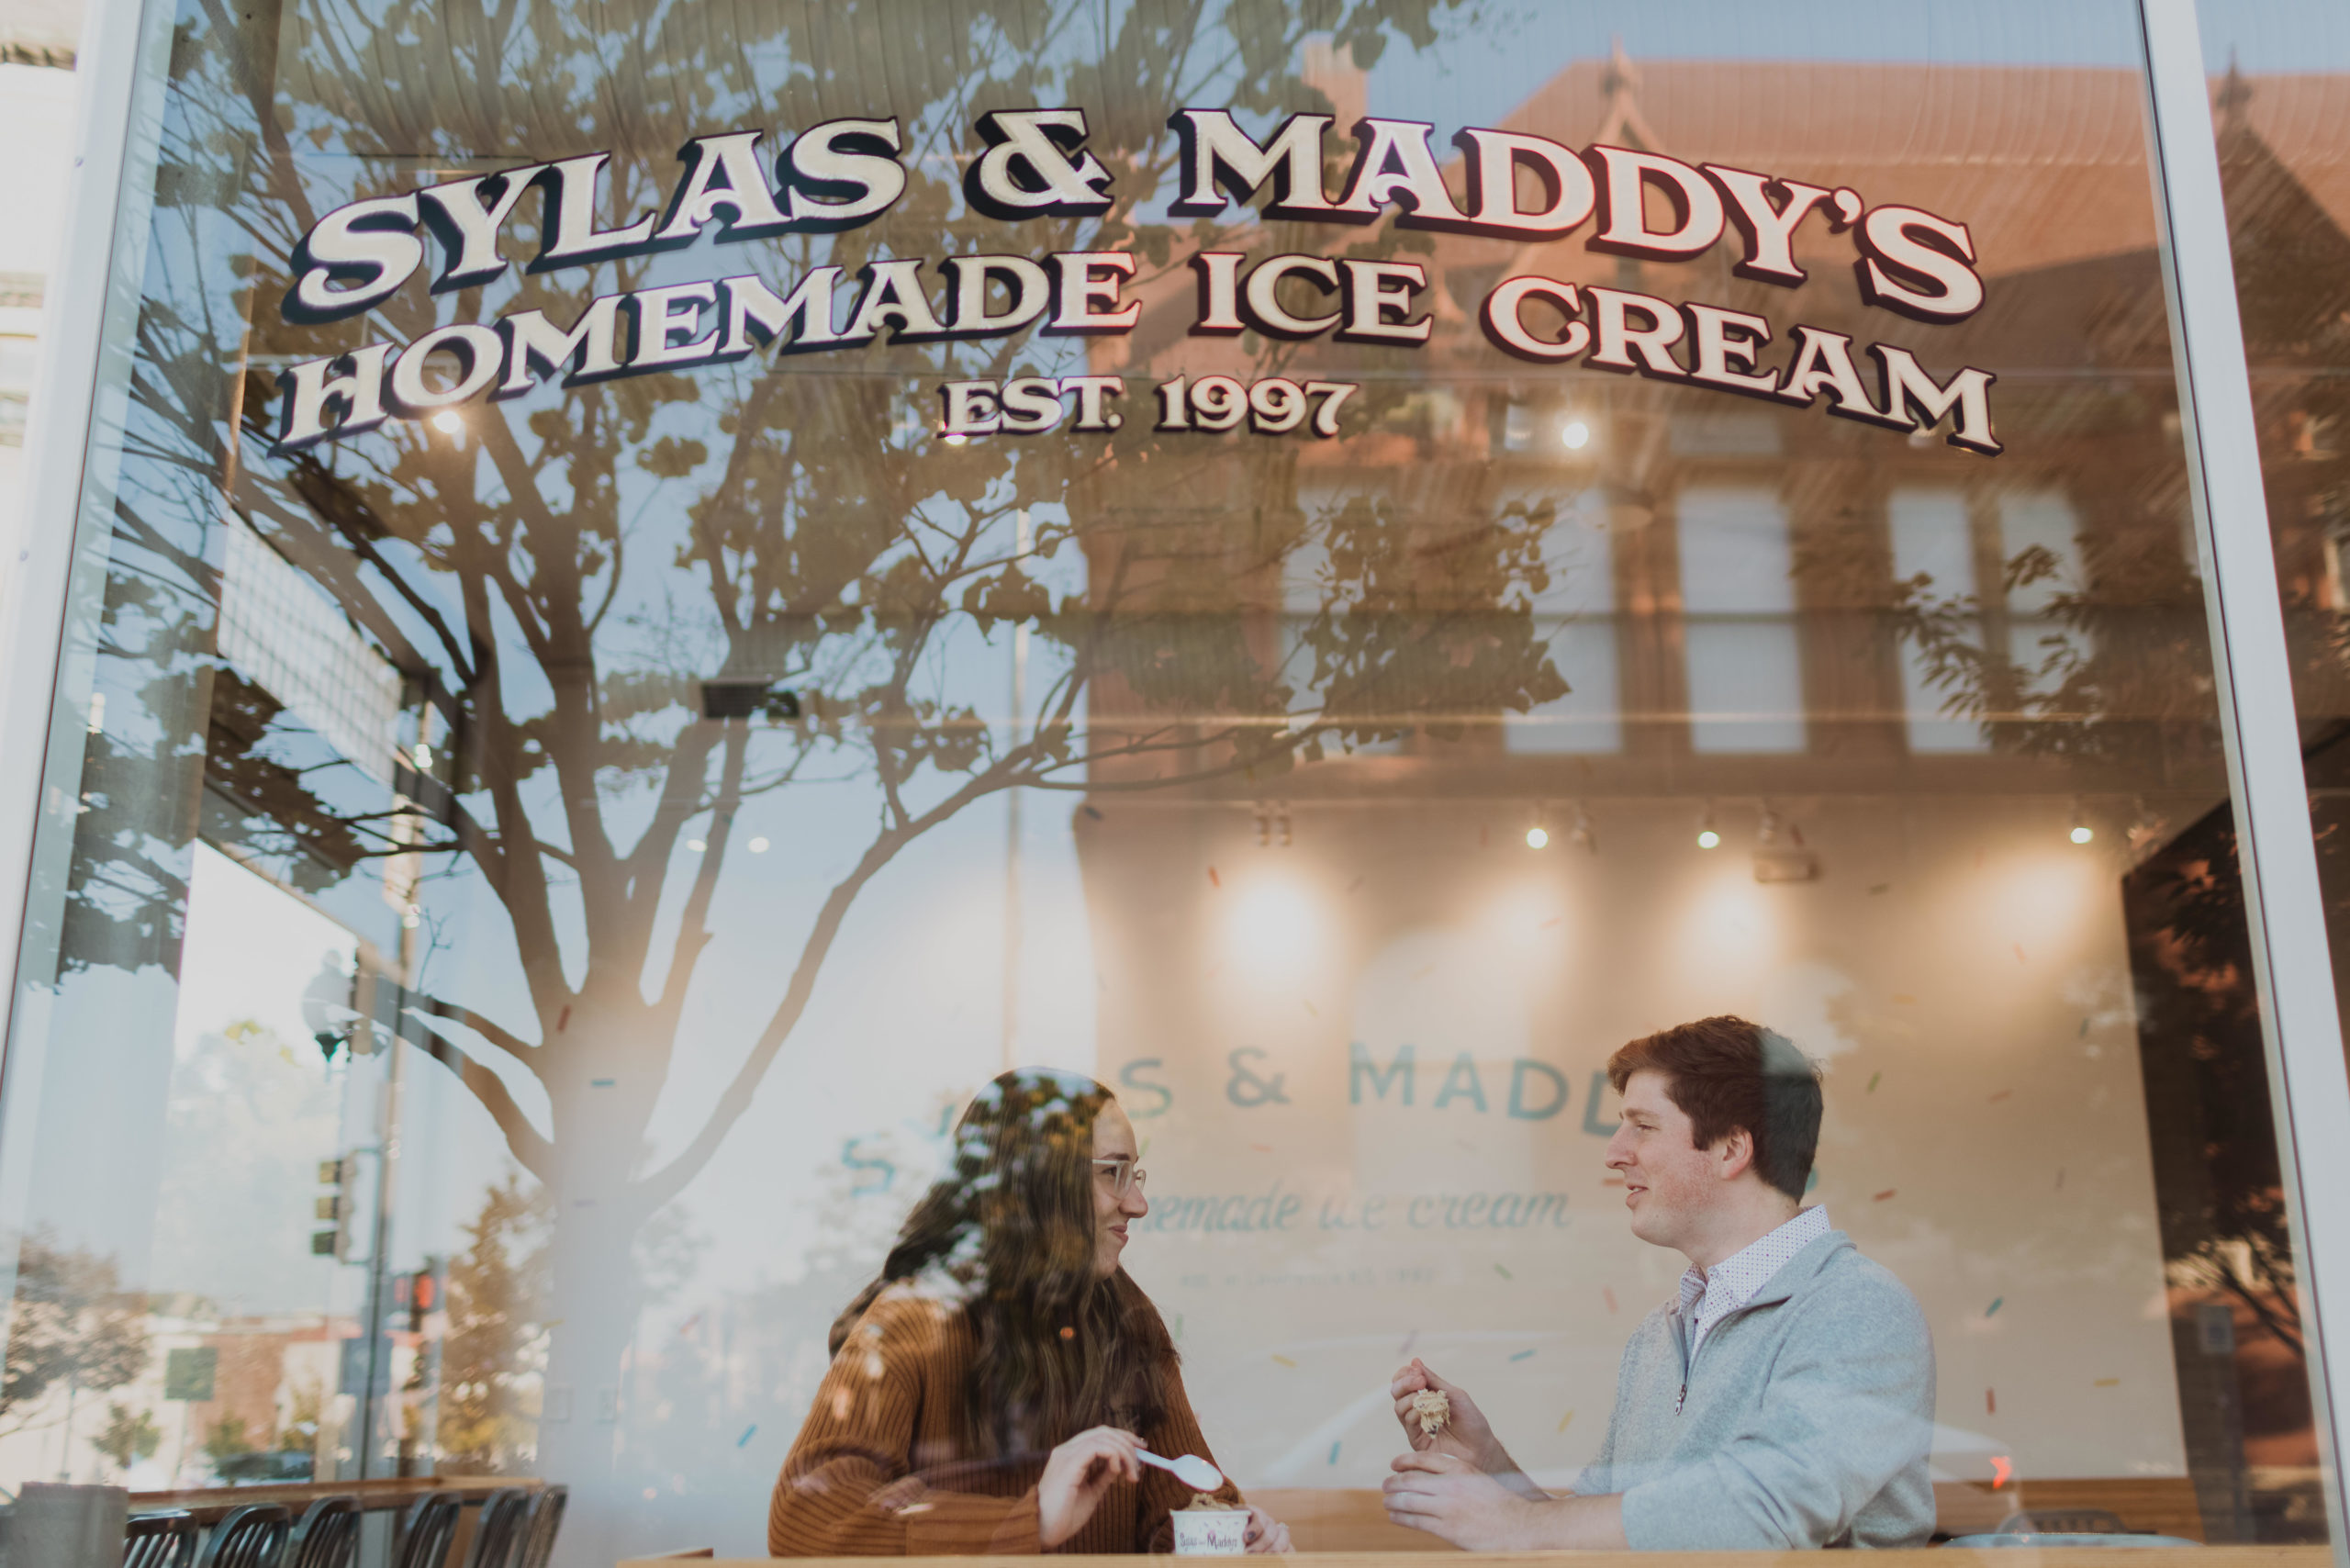 Lawrence Kansas Engagement Photos with ice cream and dog